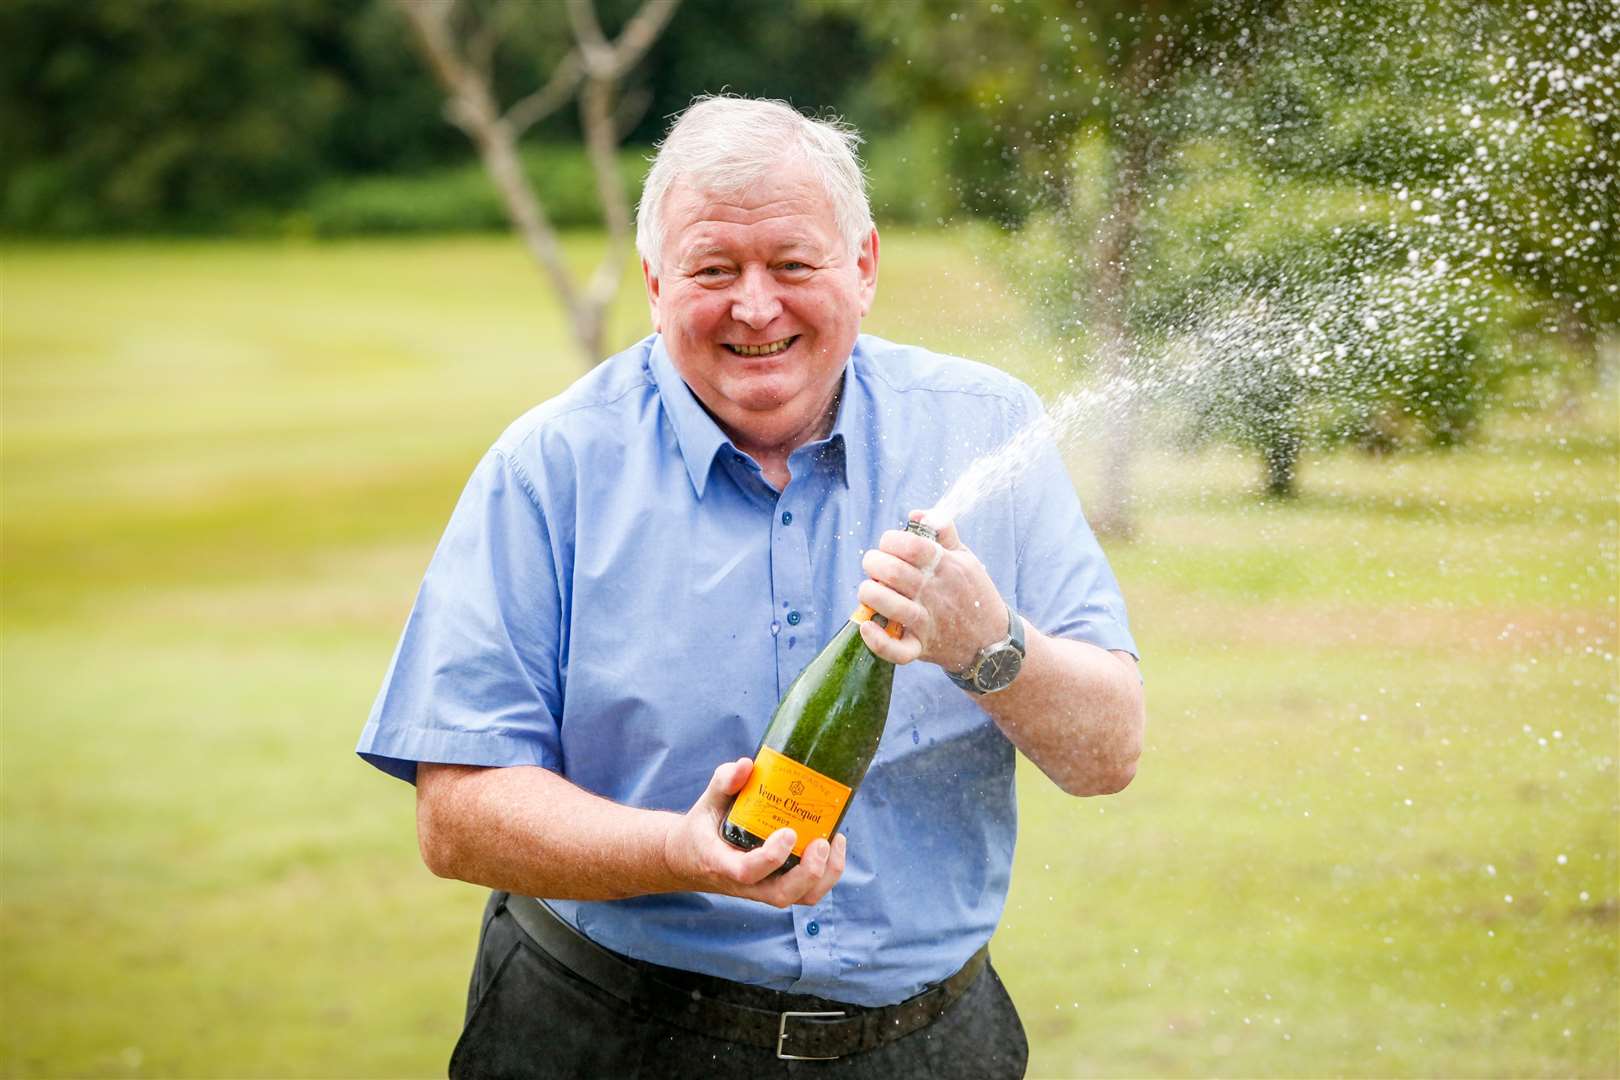 EuroMillions Lottery Winner Stephen Cole scooped over £286,000 thousand in the draw